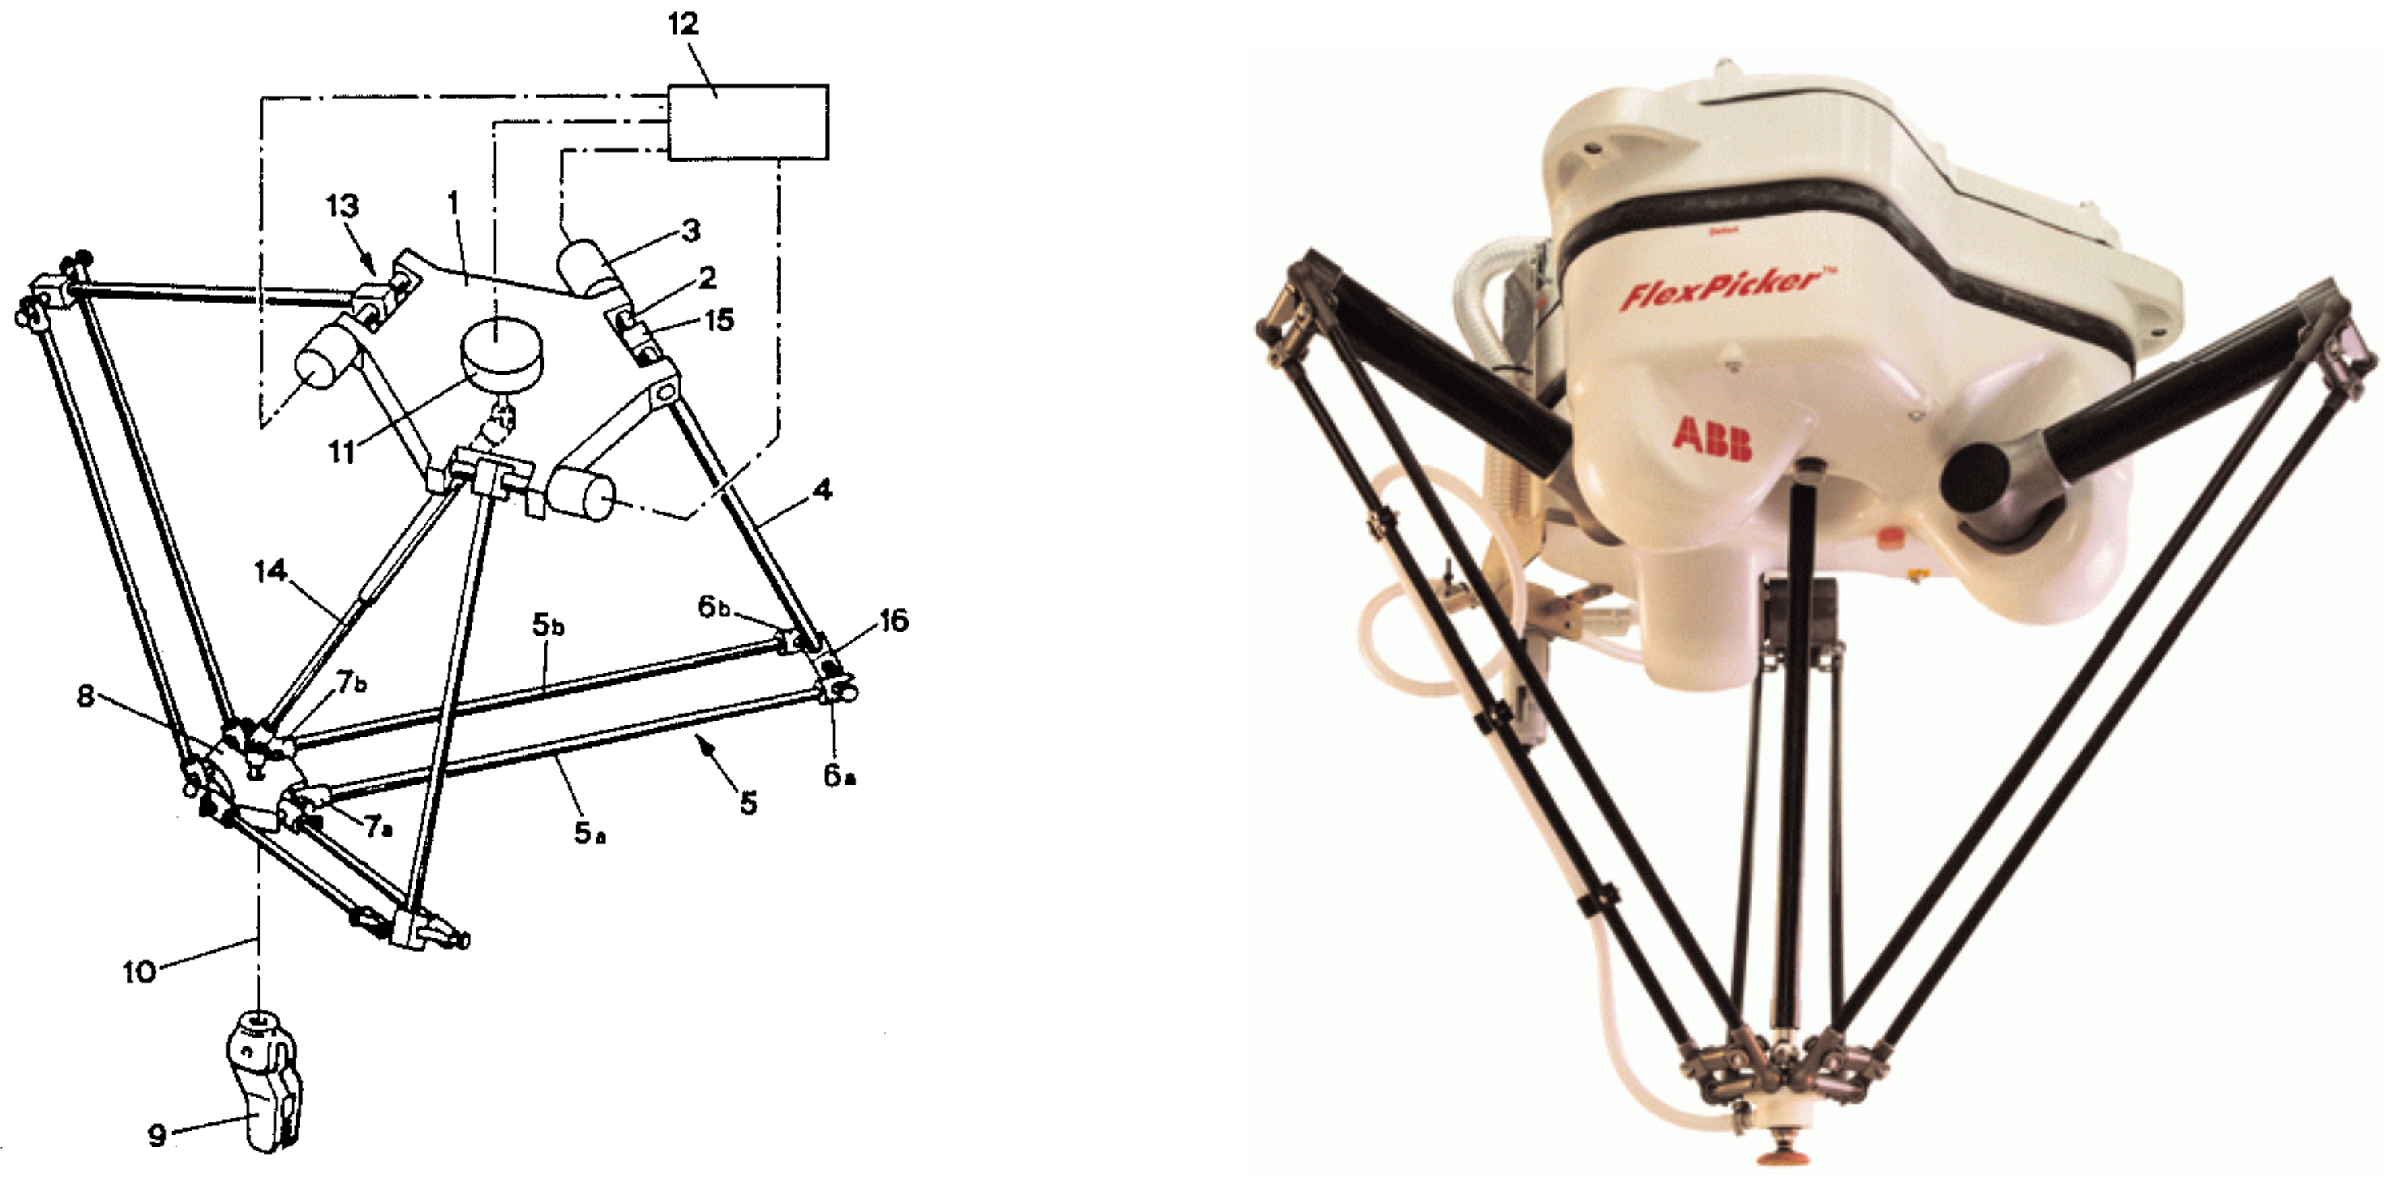 Engineering Proceedings | Free | The 3D-Printed Low-Cost Delta Robot &Oacute;scar: Technology Overview and Benchmarking